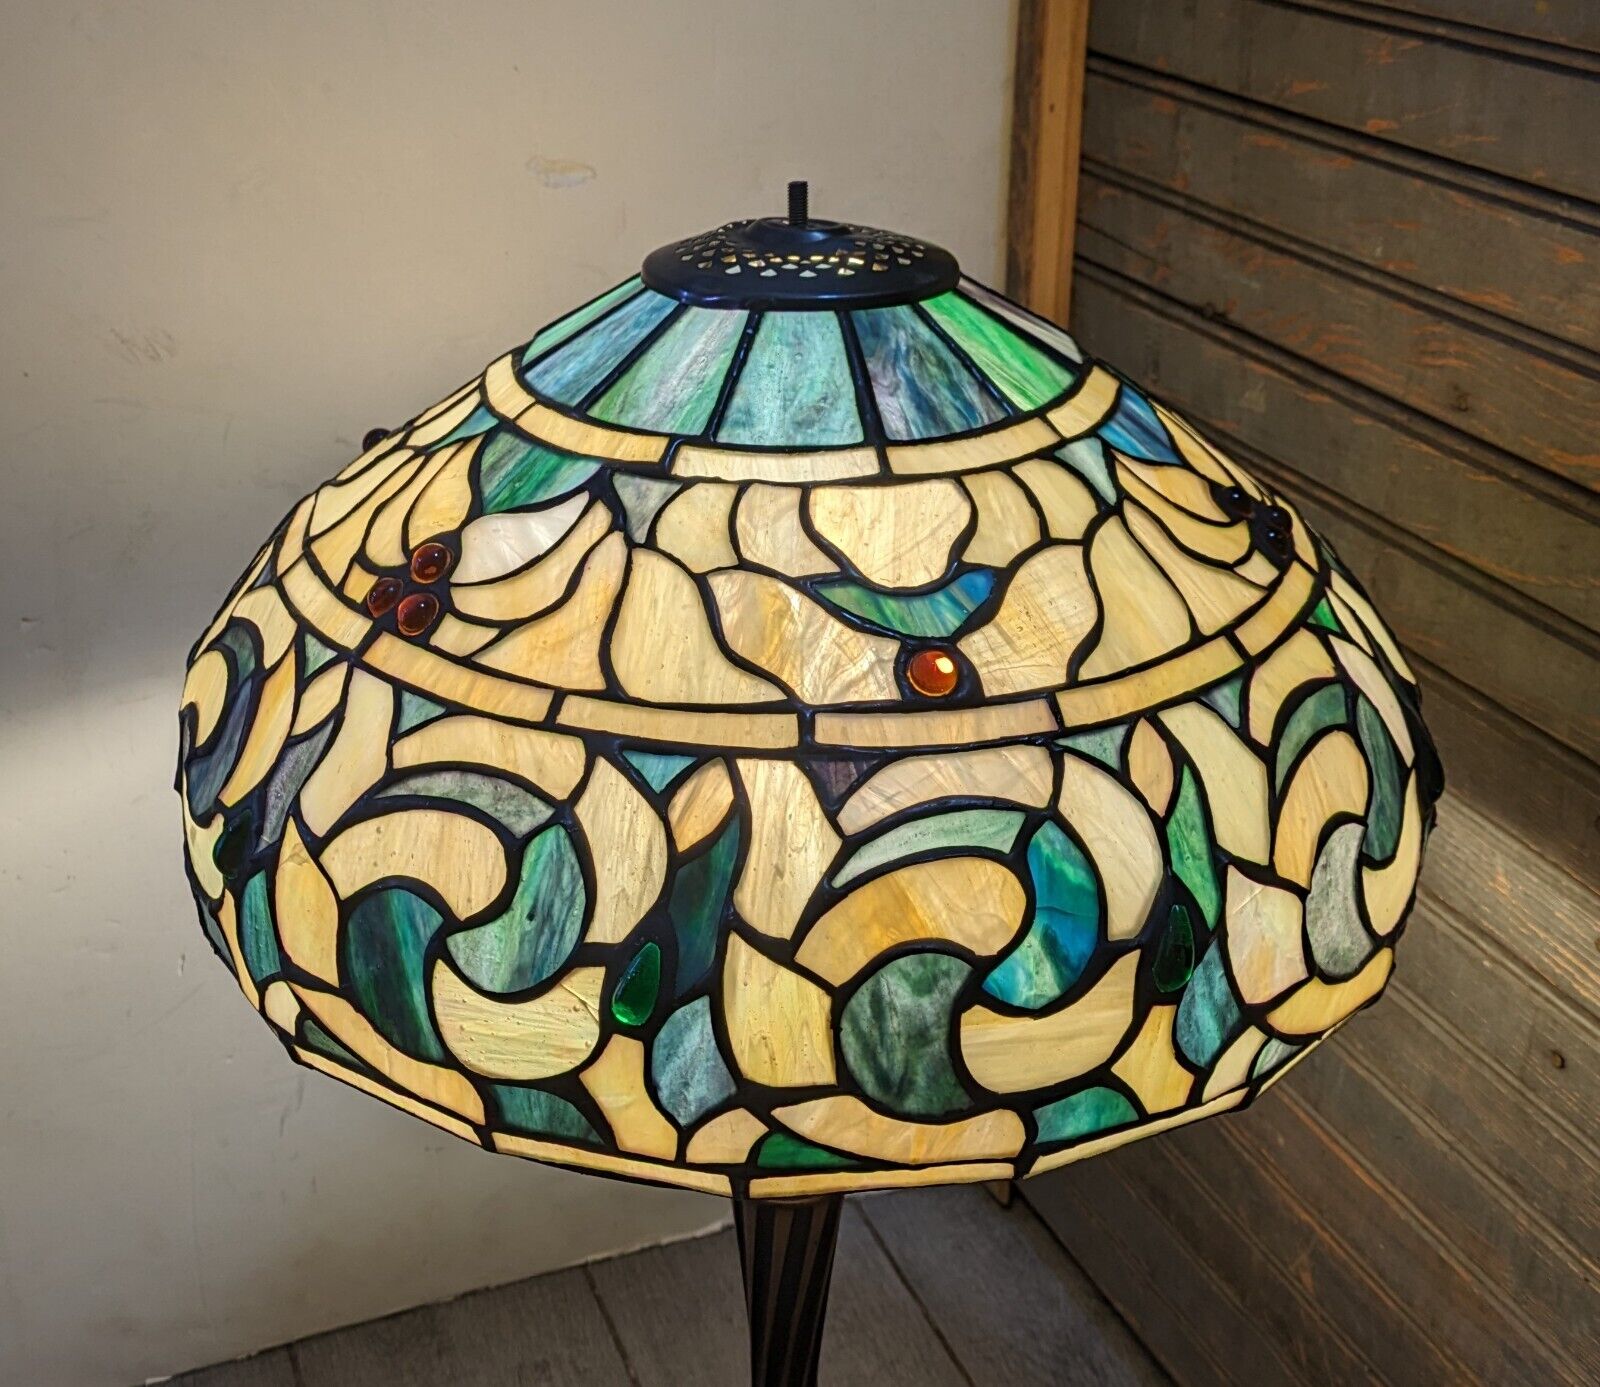 Vintage Tiffany Style Jeweled Stained Glass Lamp Shade K36